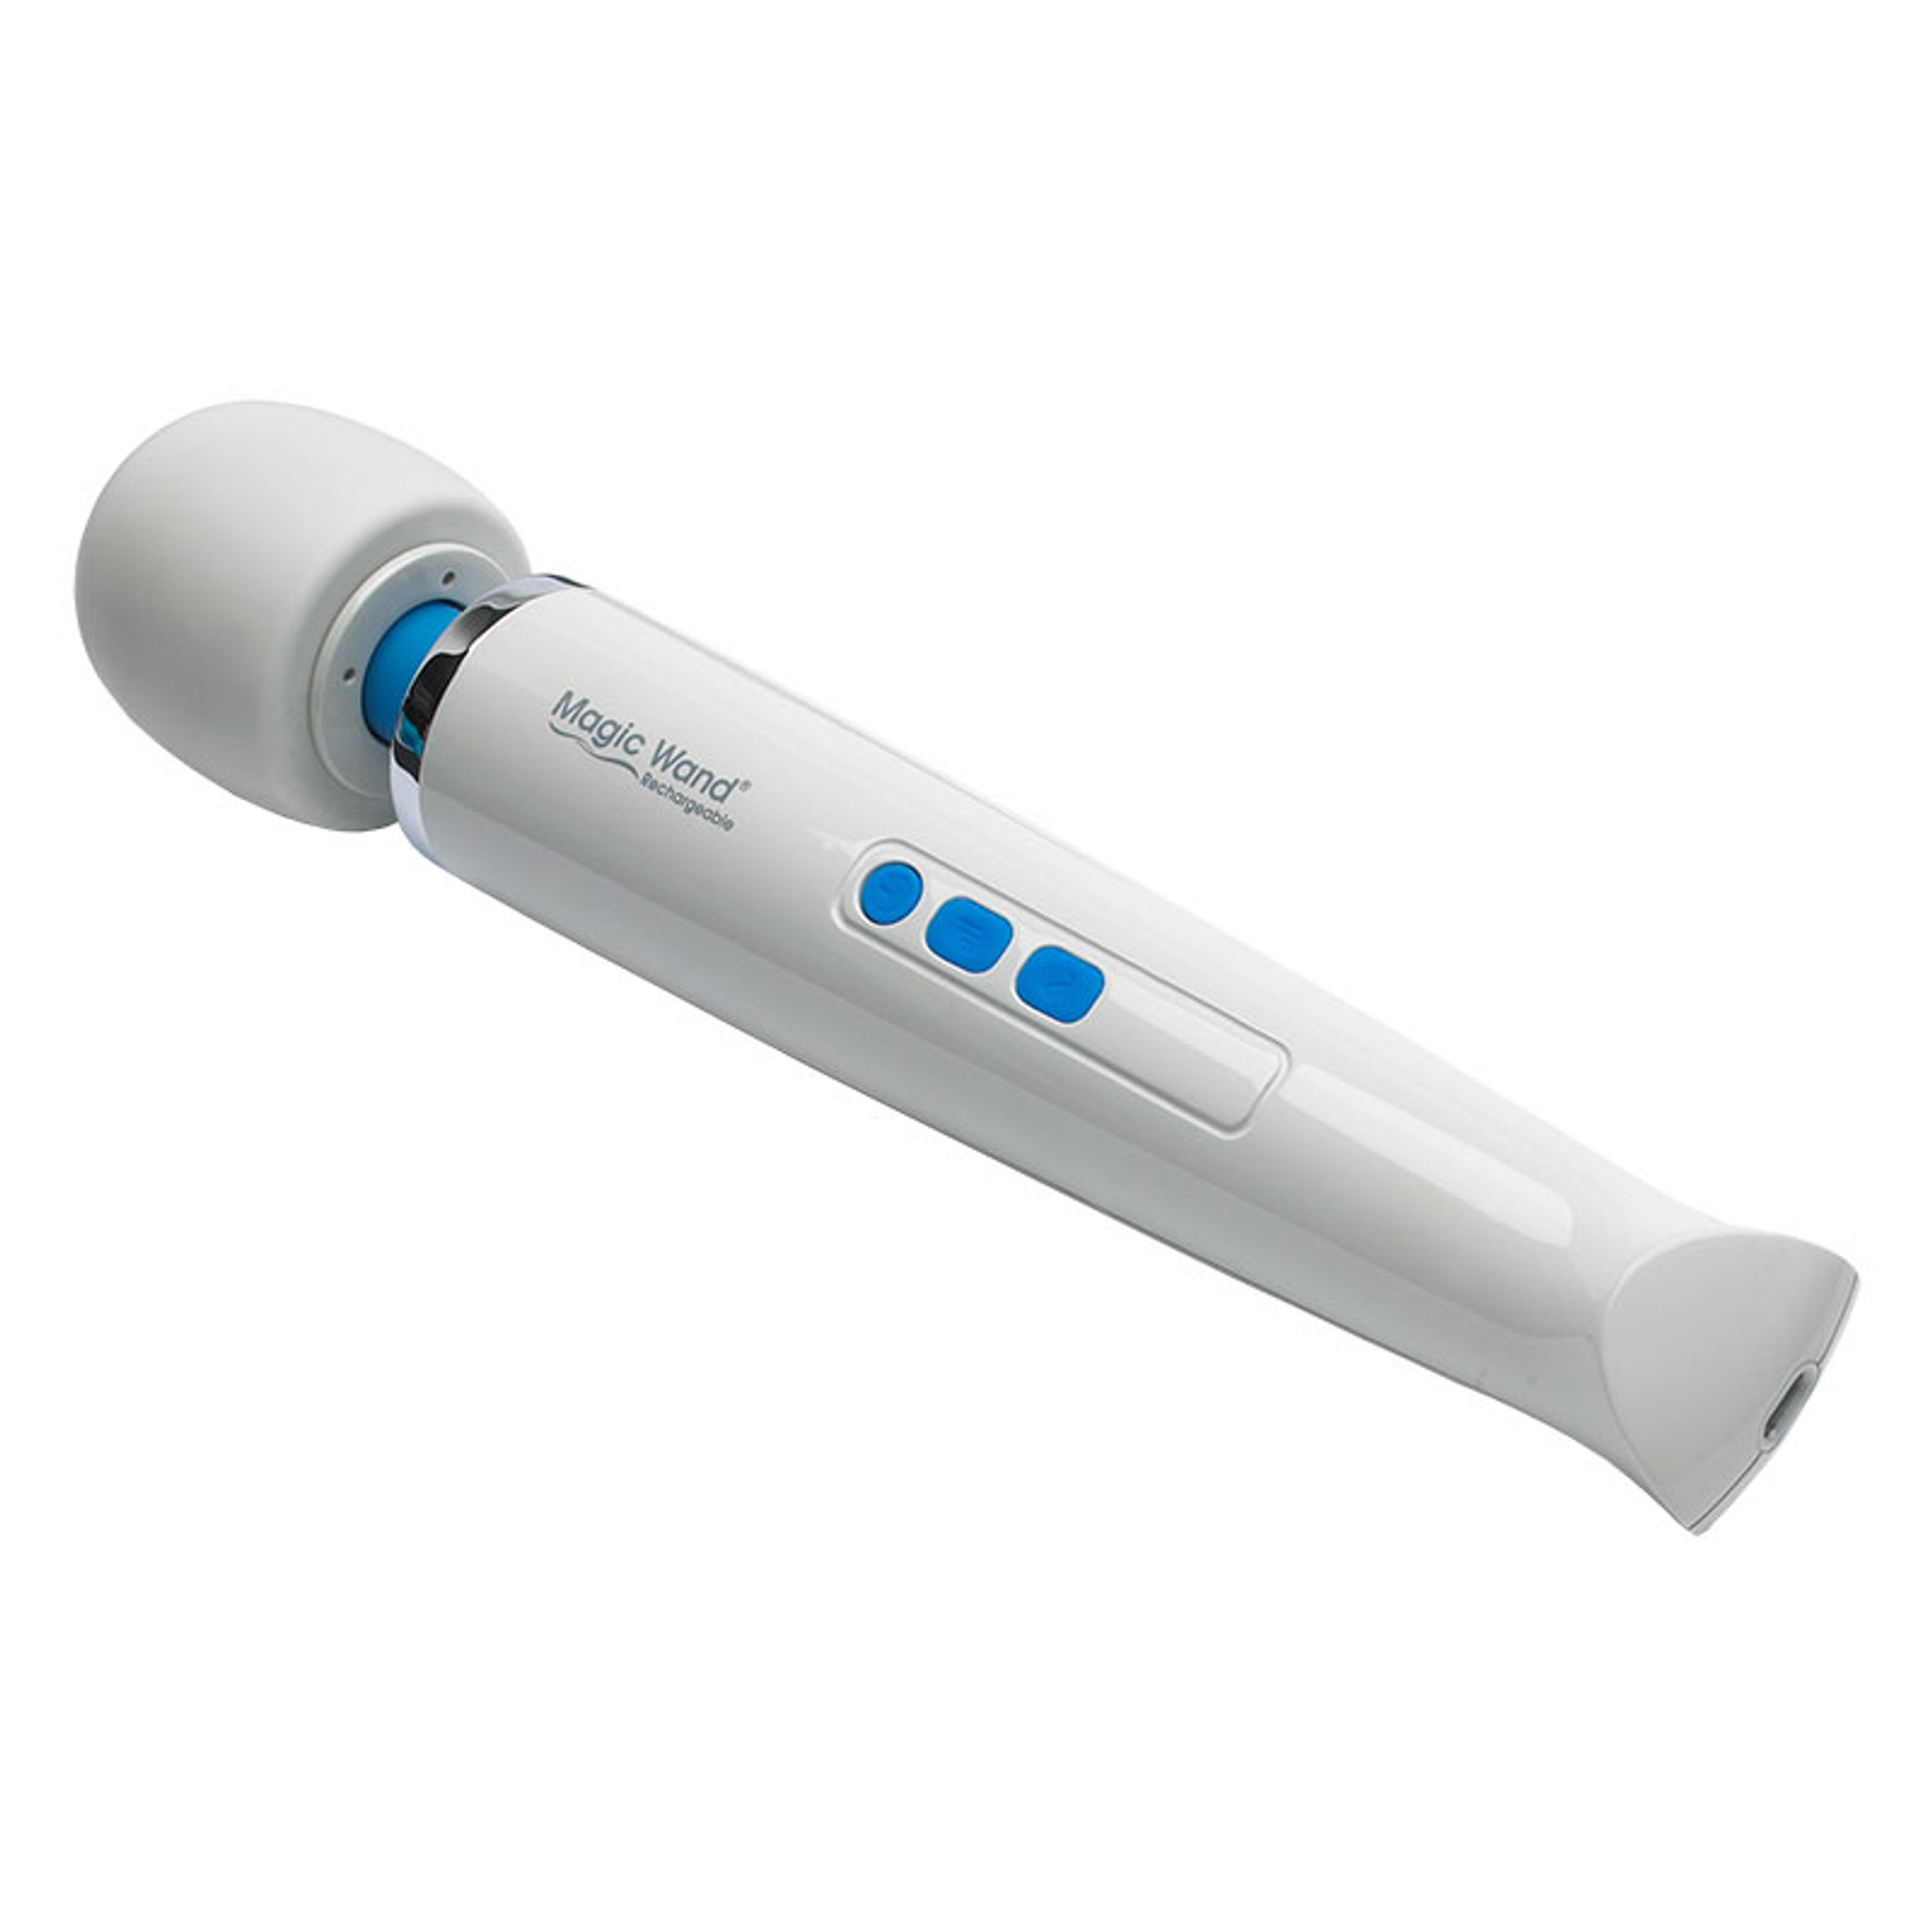 Get the Magic Wand Rechargeable at Castle Megastore